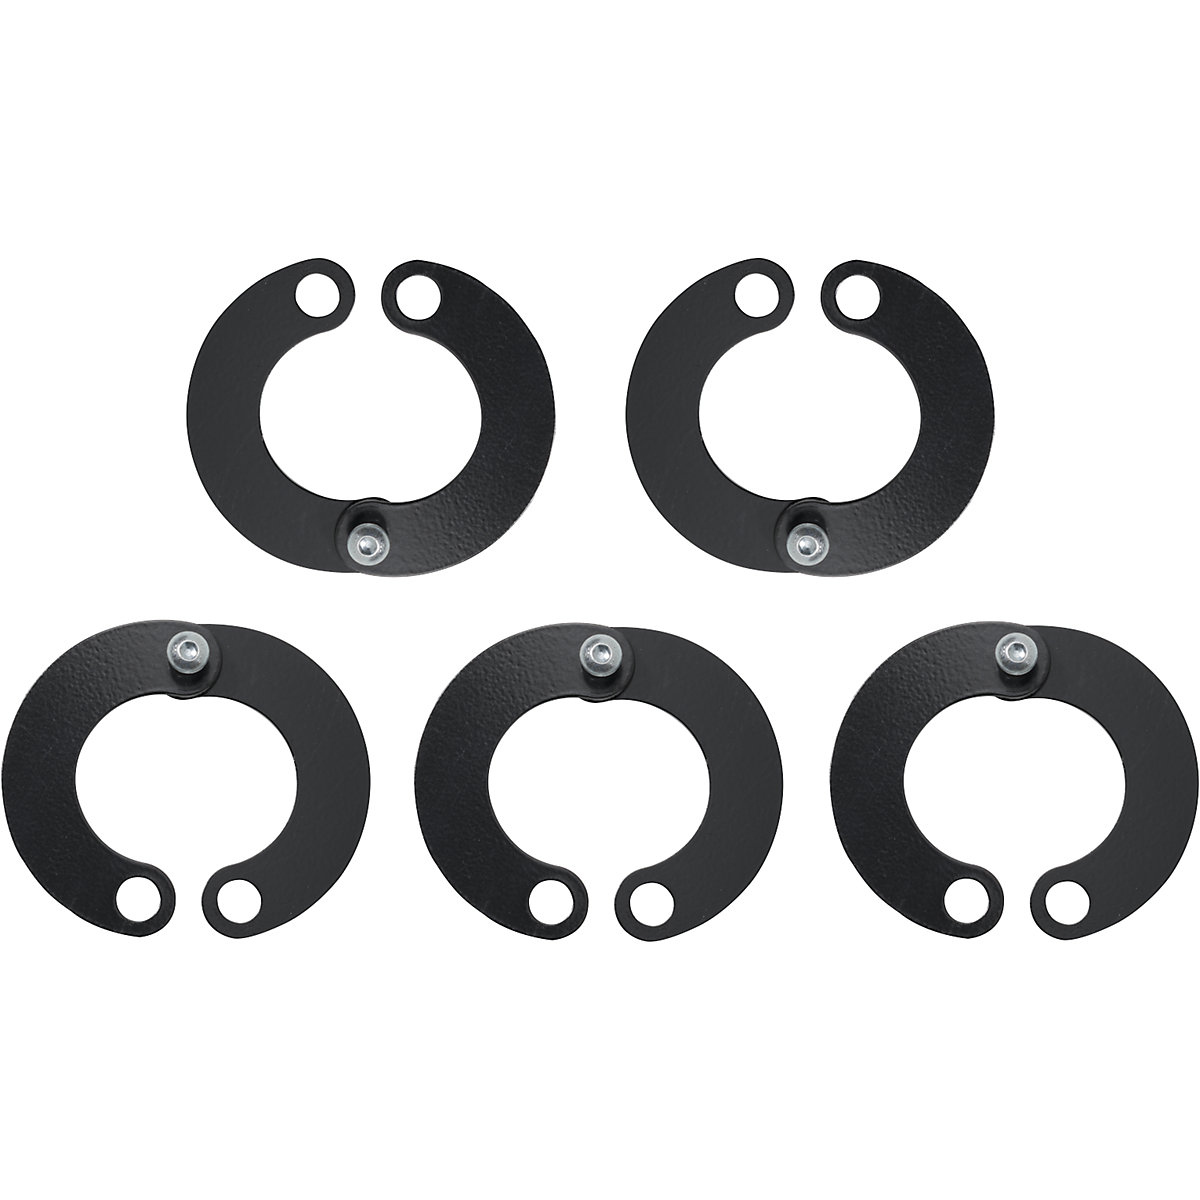 Support clamp set